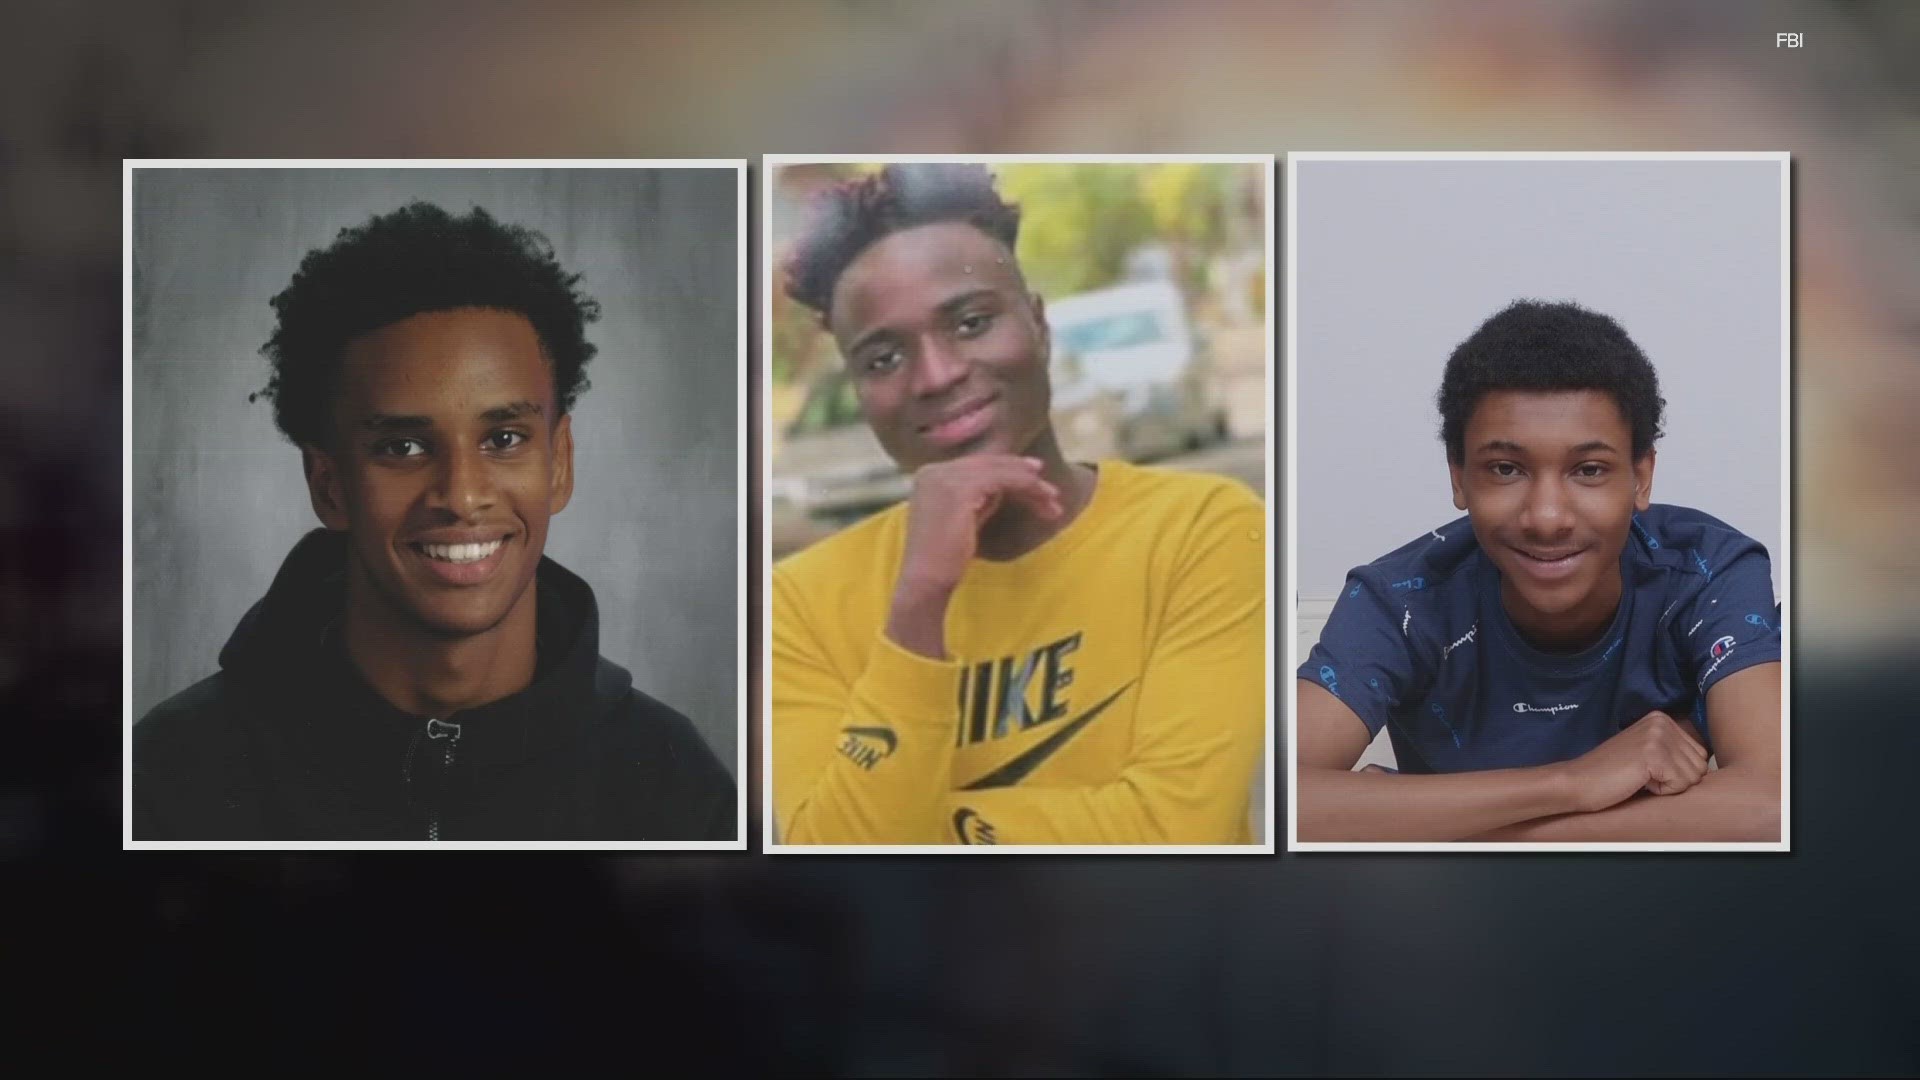 Three people were killed in North Portland in March. The FBI has increased a reward for information leading to a conviction to $25,000.